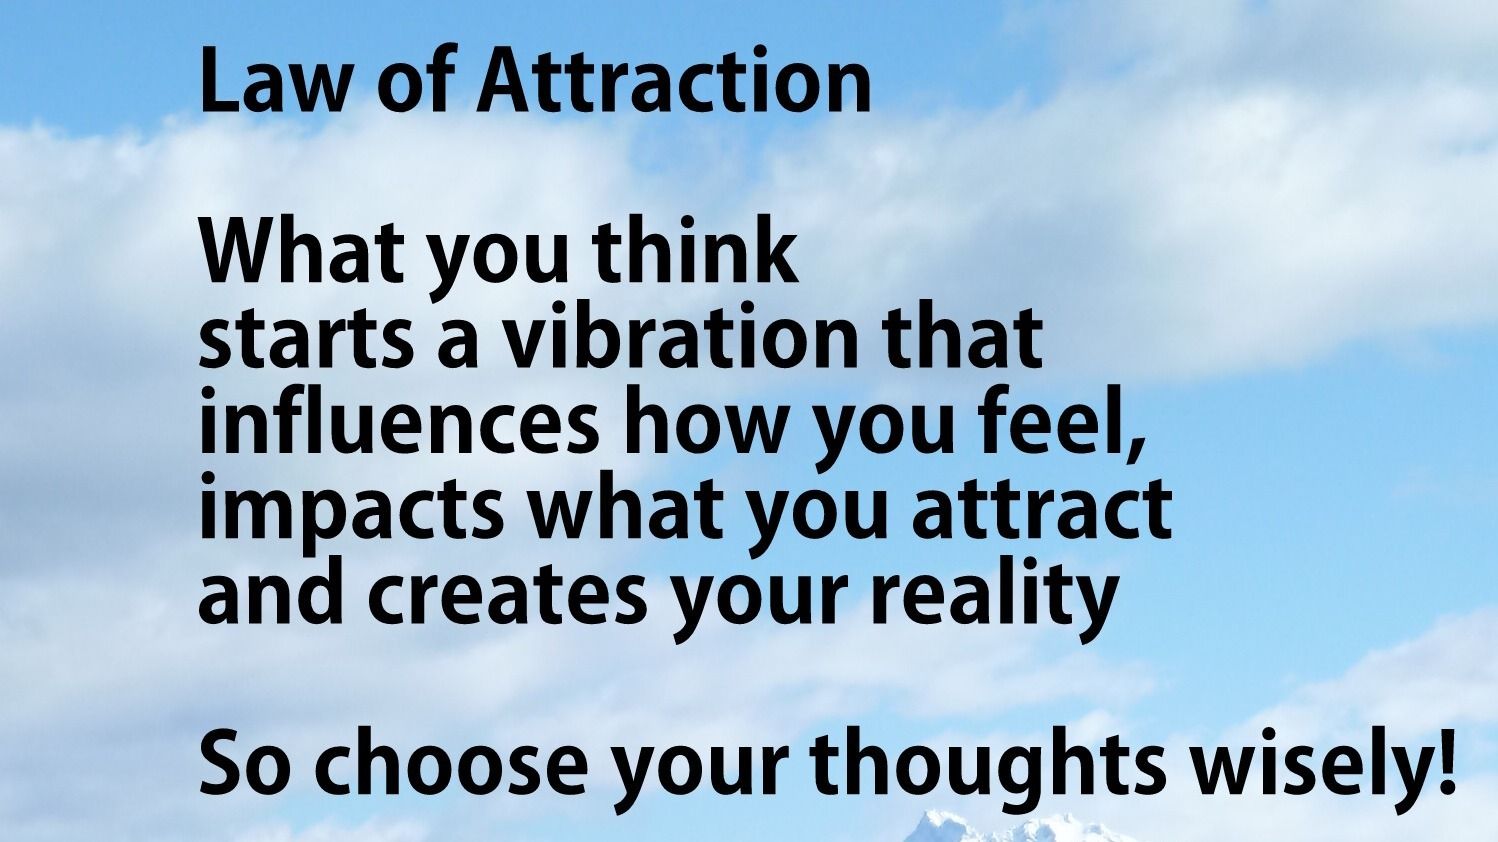 The Law of Attraction for Business - ActionCOACH